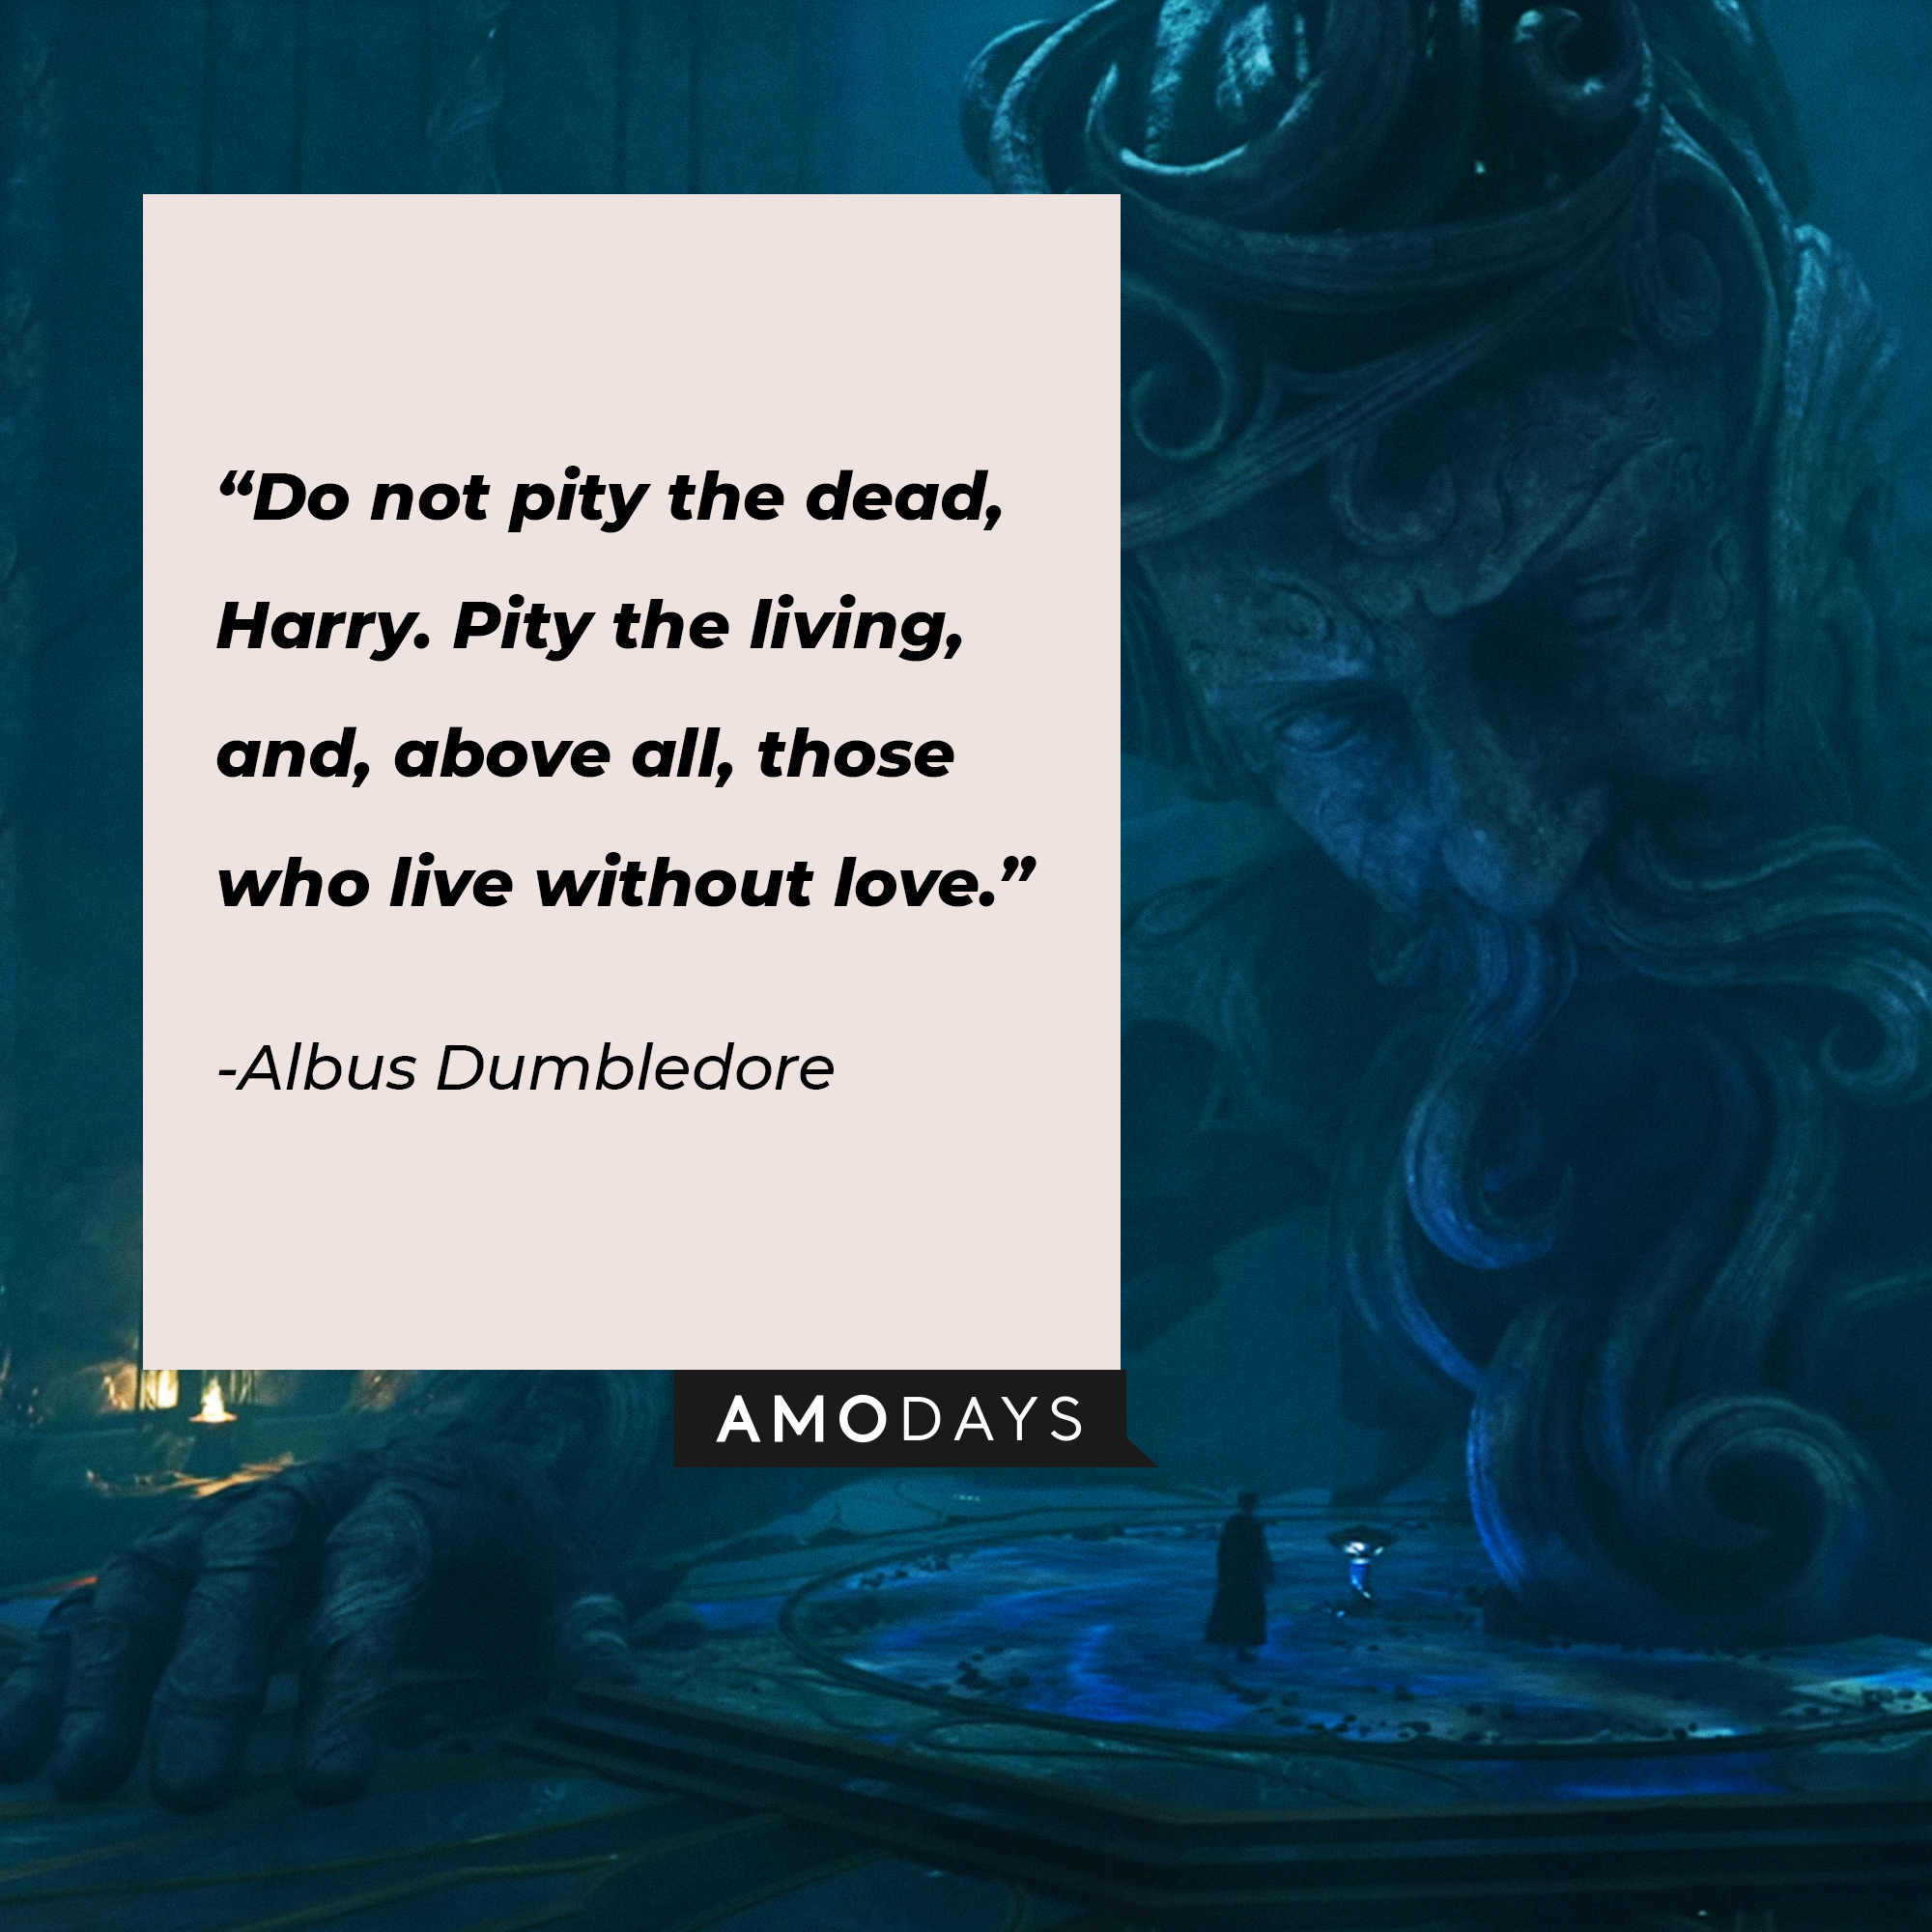 Albus Dumbledore's quote: "Do not pity the dead, Harry. Pity the living, and, above all, those who live without love." | Source: Youtube.com/HogwartsLegacy